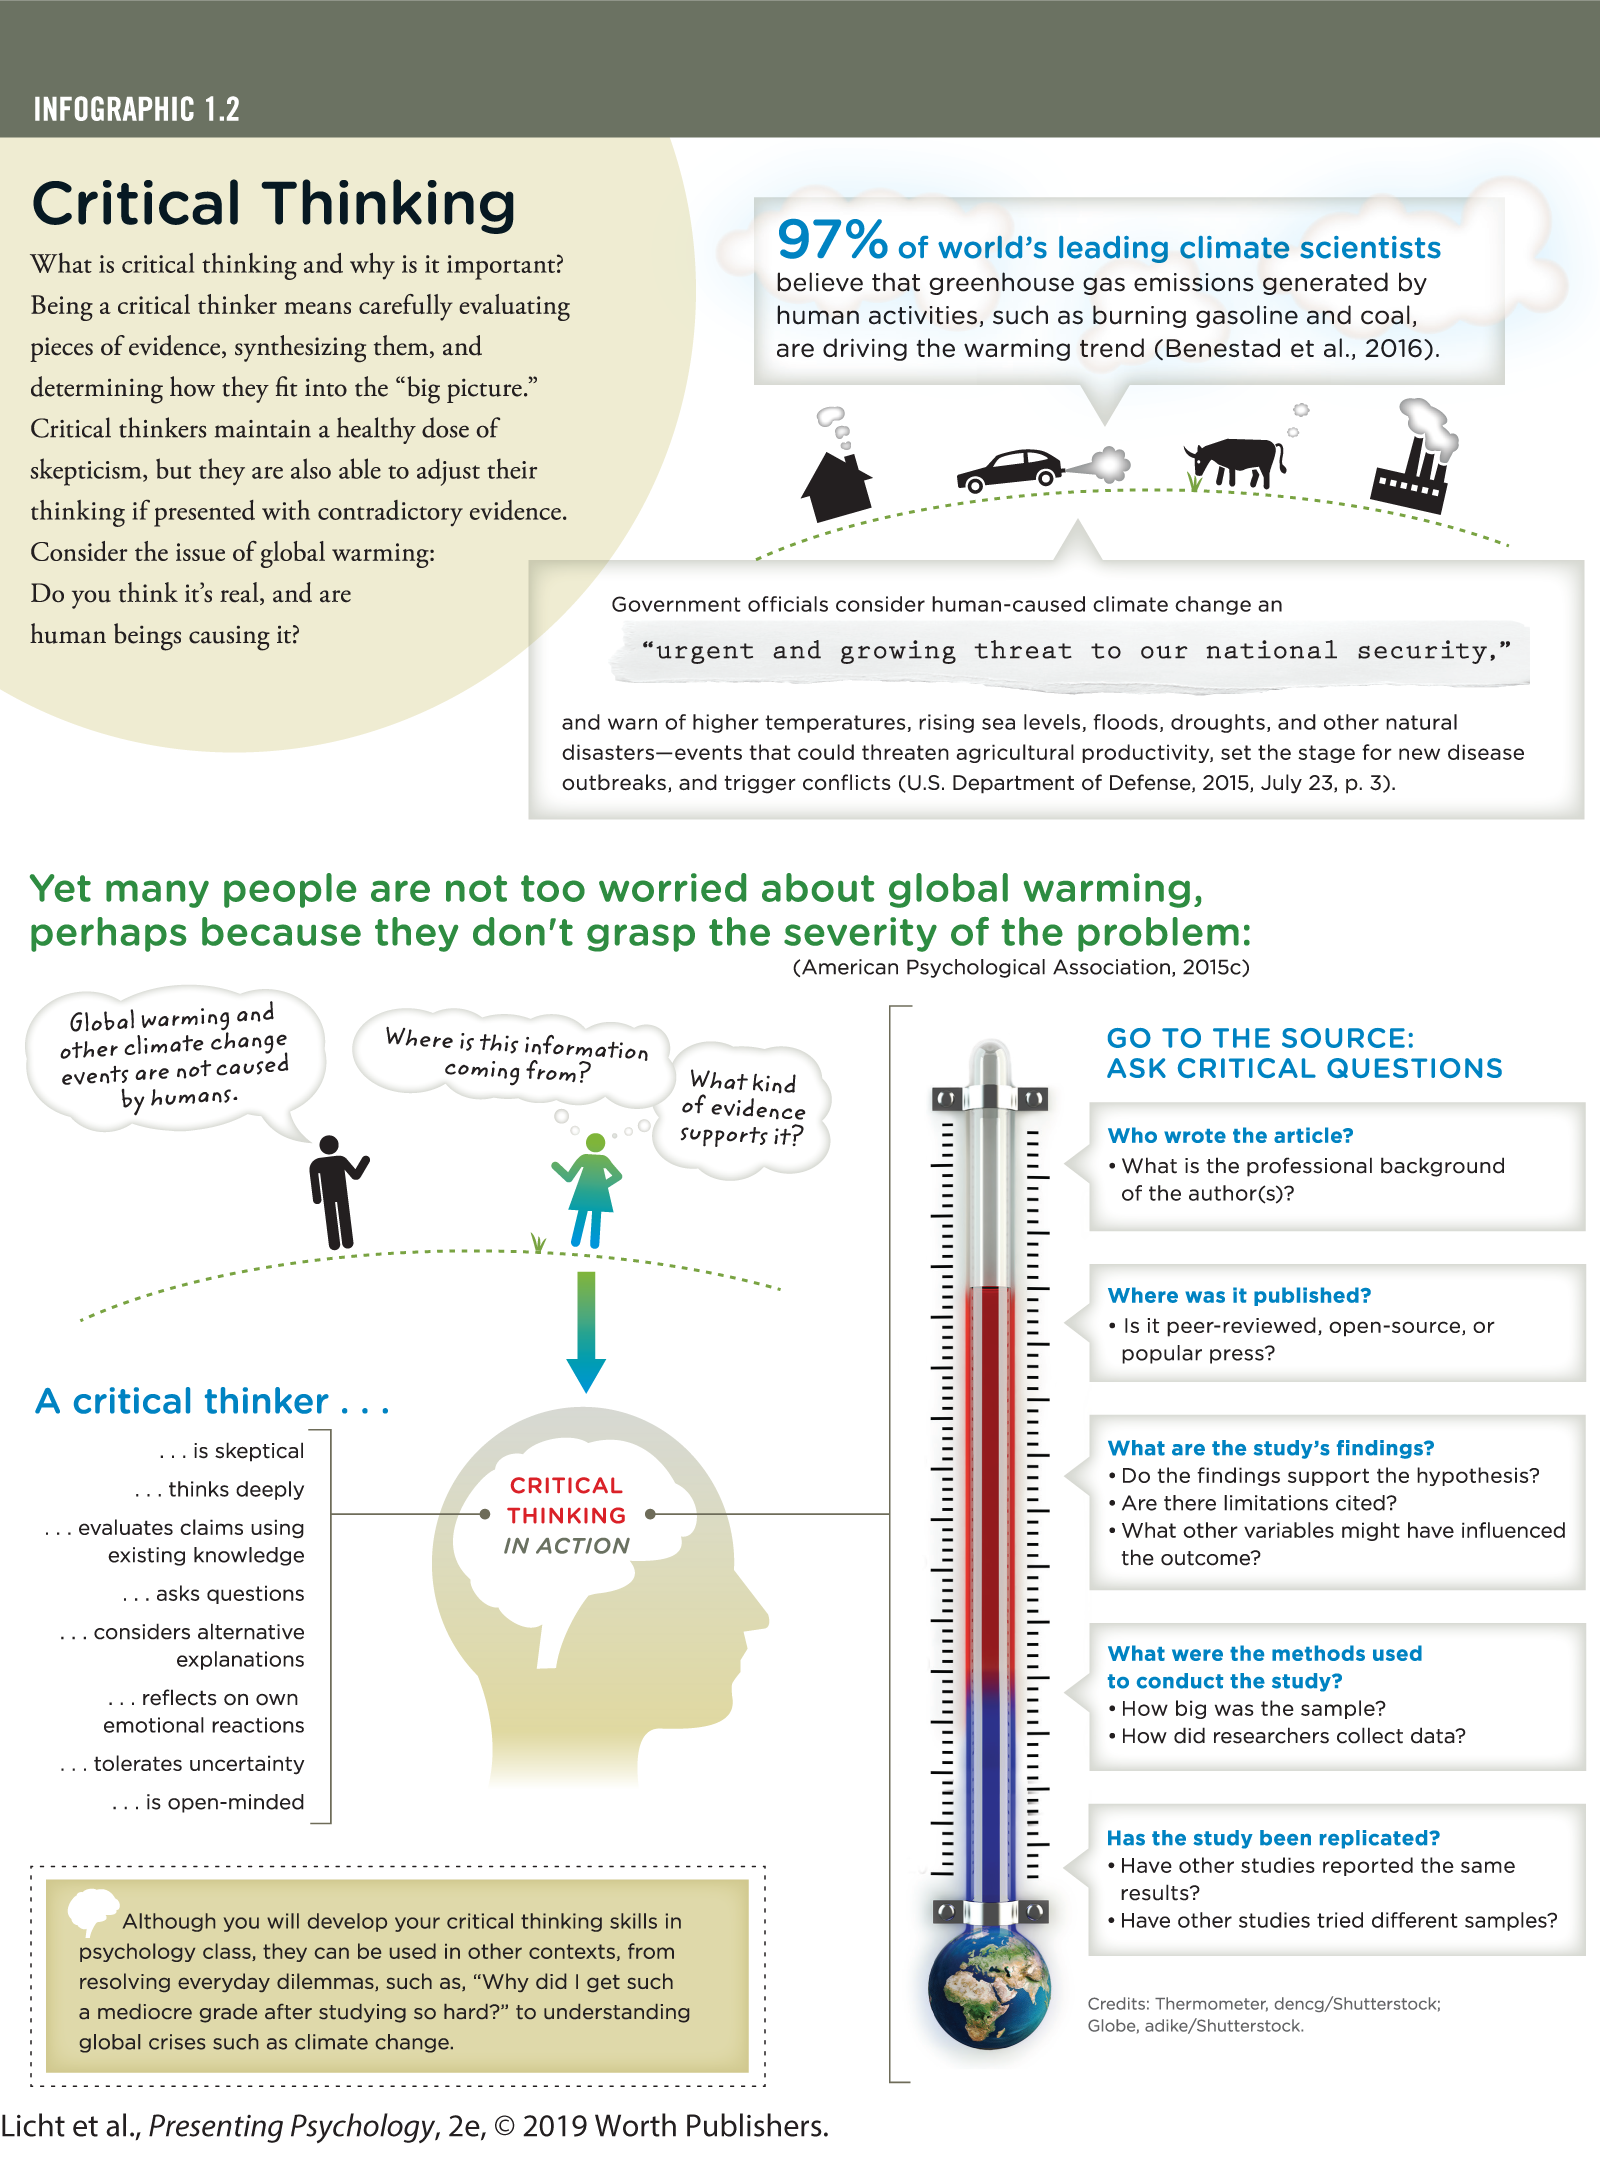 An infographic titled Critical Thinking elaborates on scientists’ views on climate change, lack of public perception on global warming, and resources for further reading. You can read full description from the link below